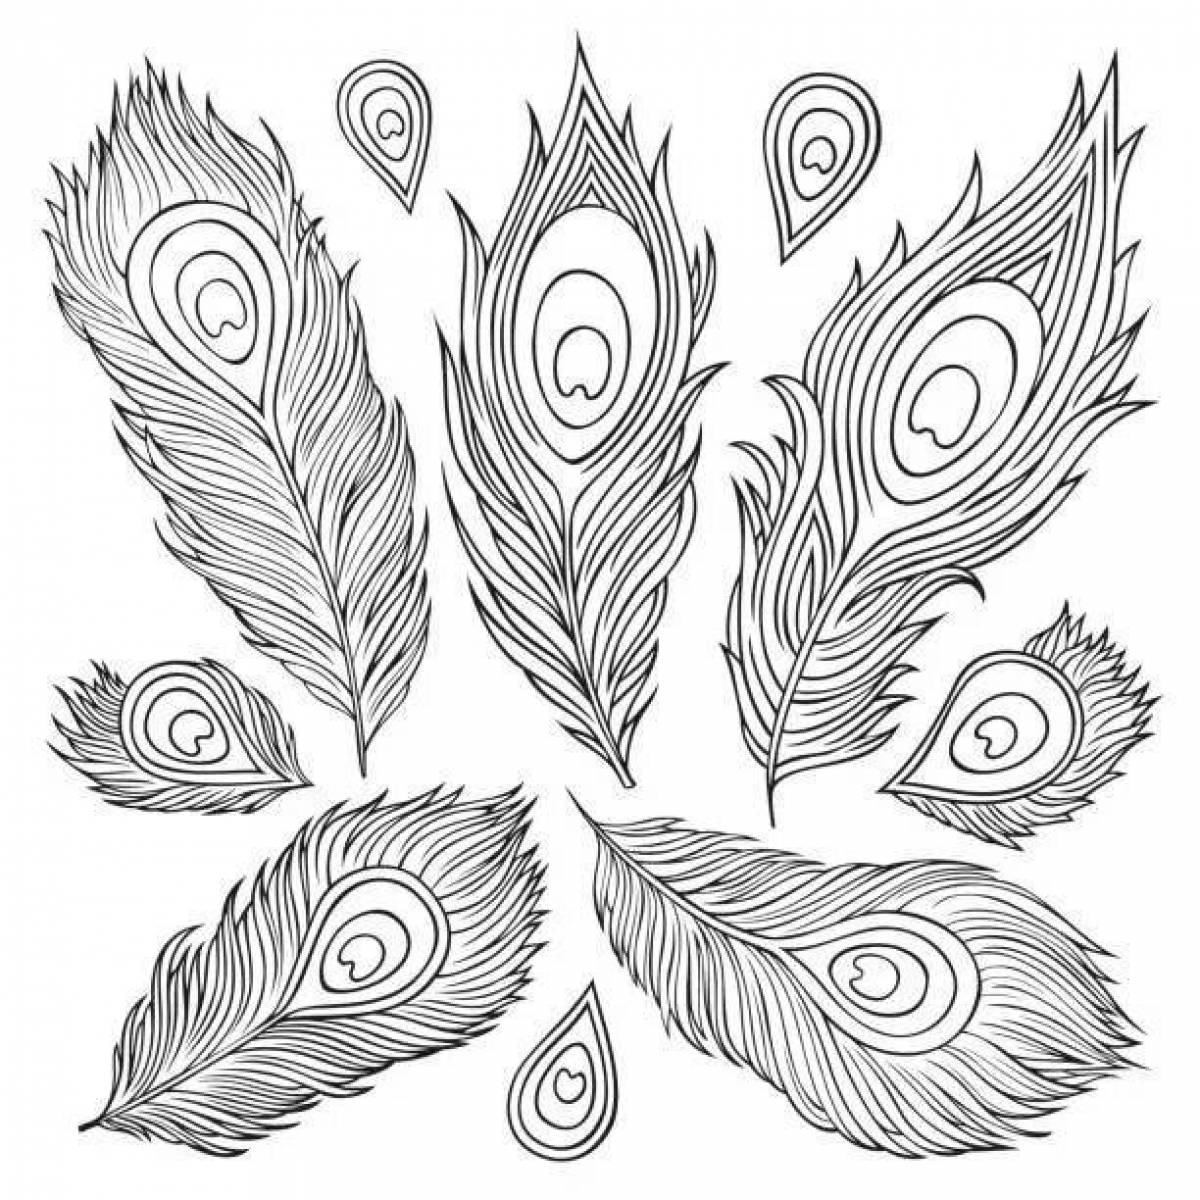 Awesome peacock feather coloring page